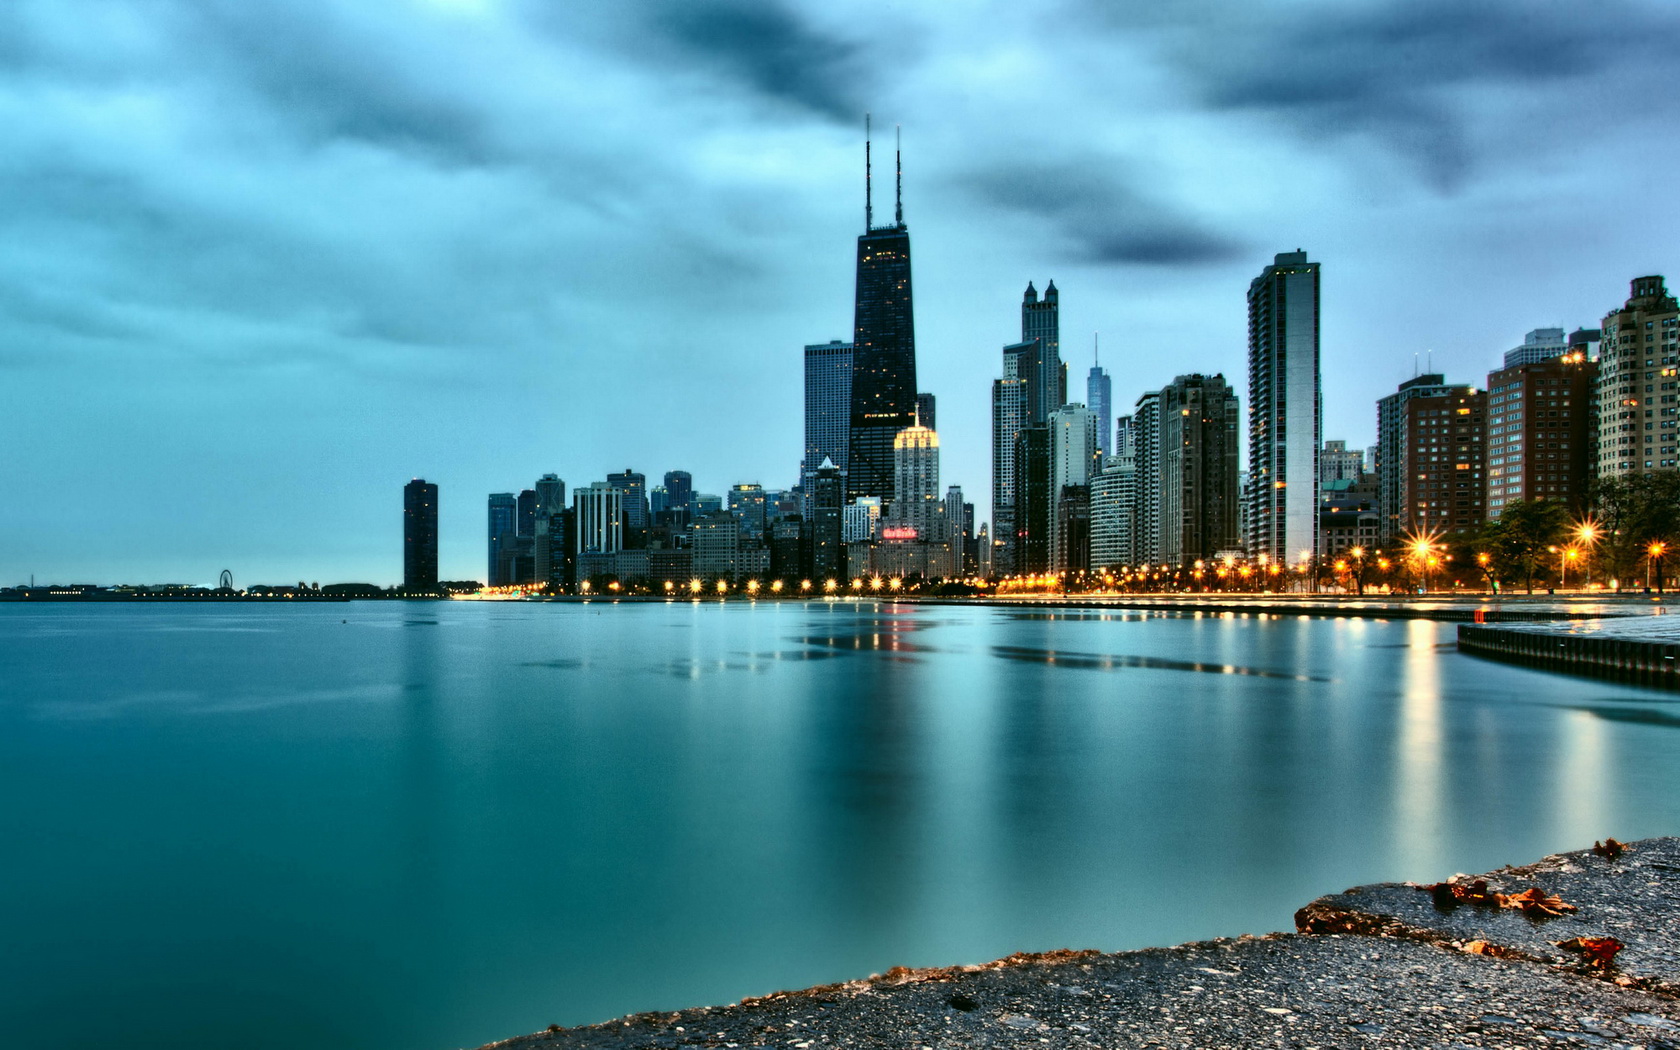 Chicago City In Illinois United States 4k Ultra Hd Wallpaper For Desktop  Laptop Tablet Mobile Phones And Tv 3840x2160  Wallpapers13com